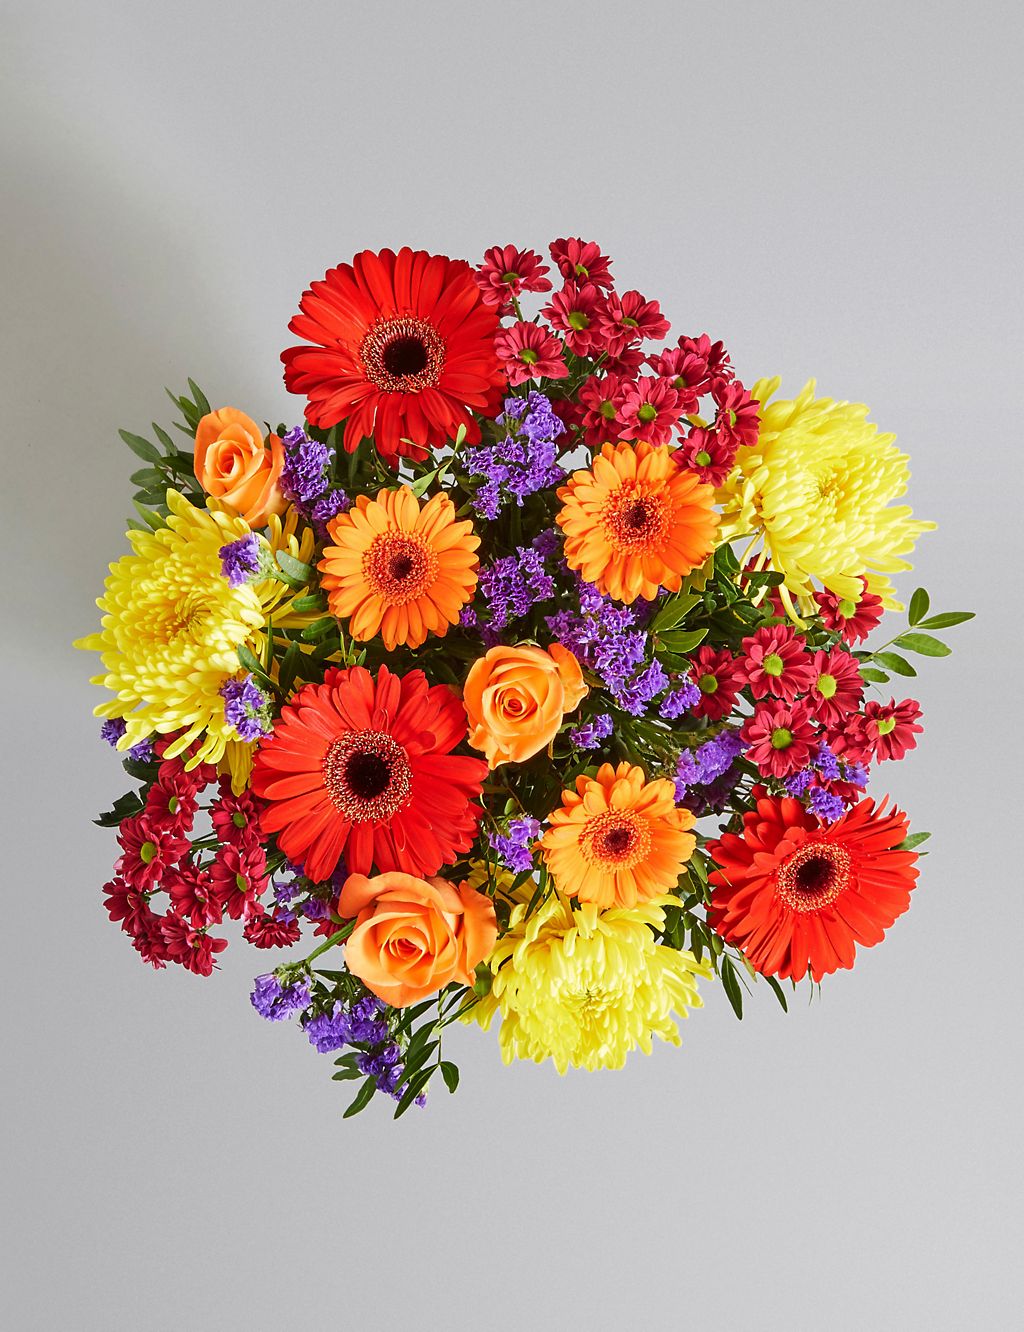 Mother’s Day Bright Bouquet with Free Chocolates Worth £6 7 of 7